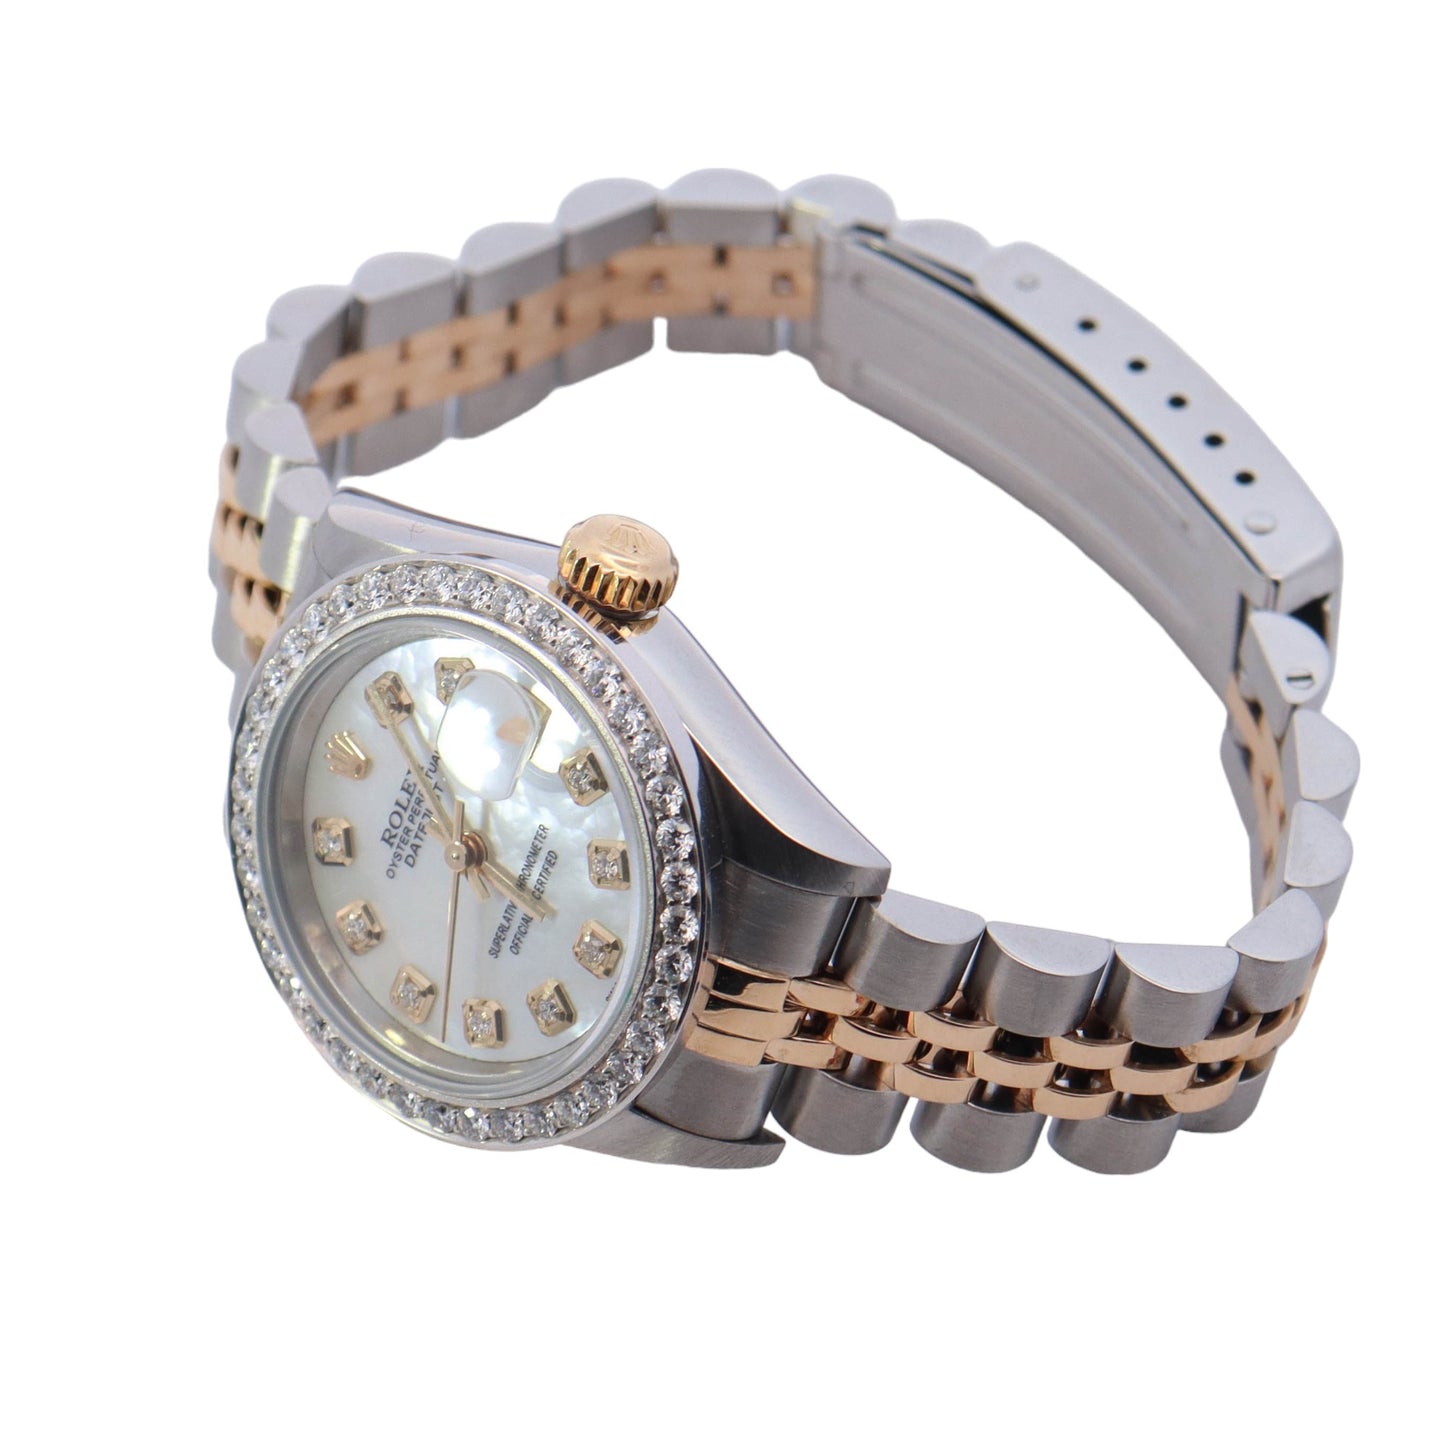 Rolex Datejust Two Tone Yellow Gold & Steel 26mm White MOP Diamond Dial Watch Reference #: 79173